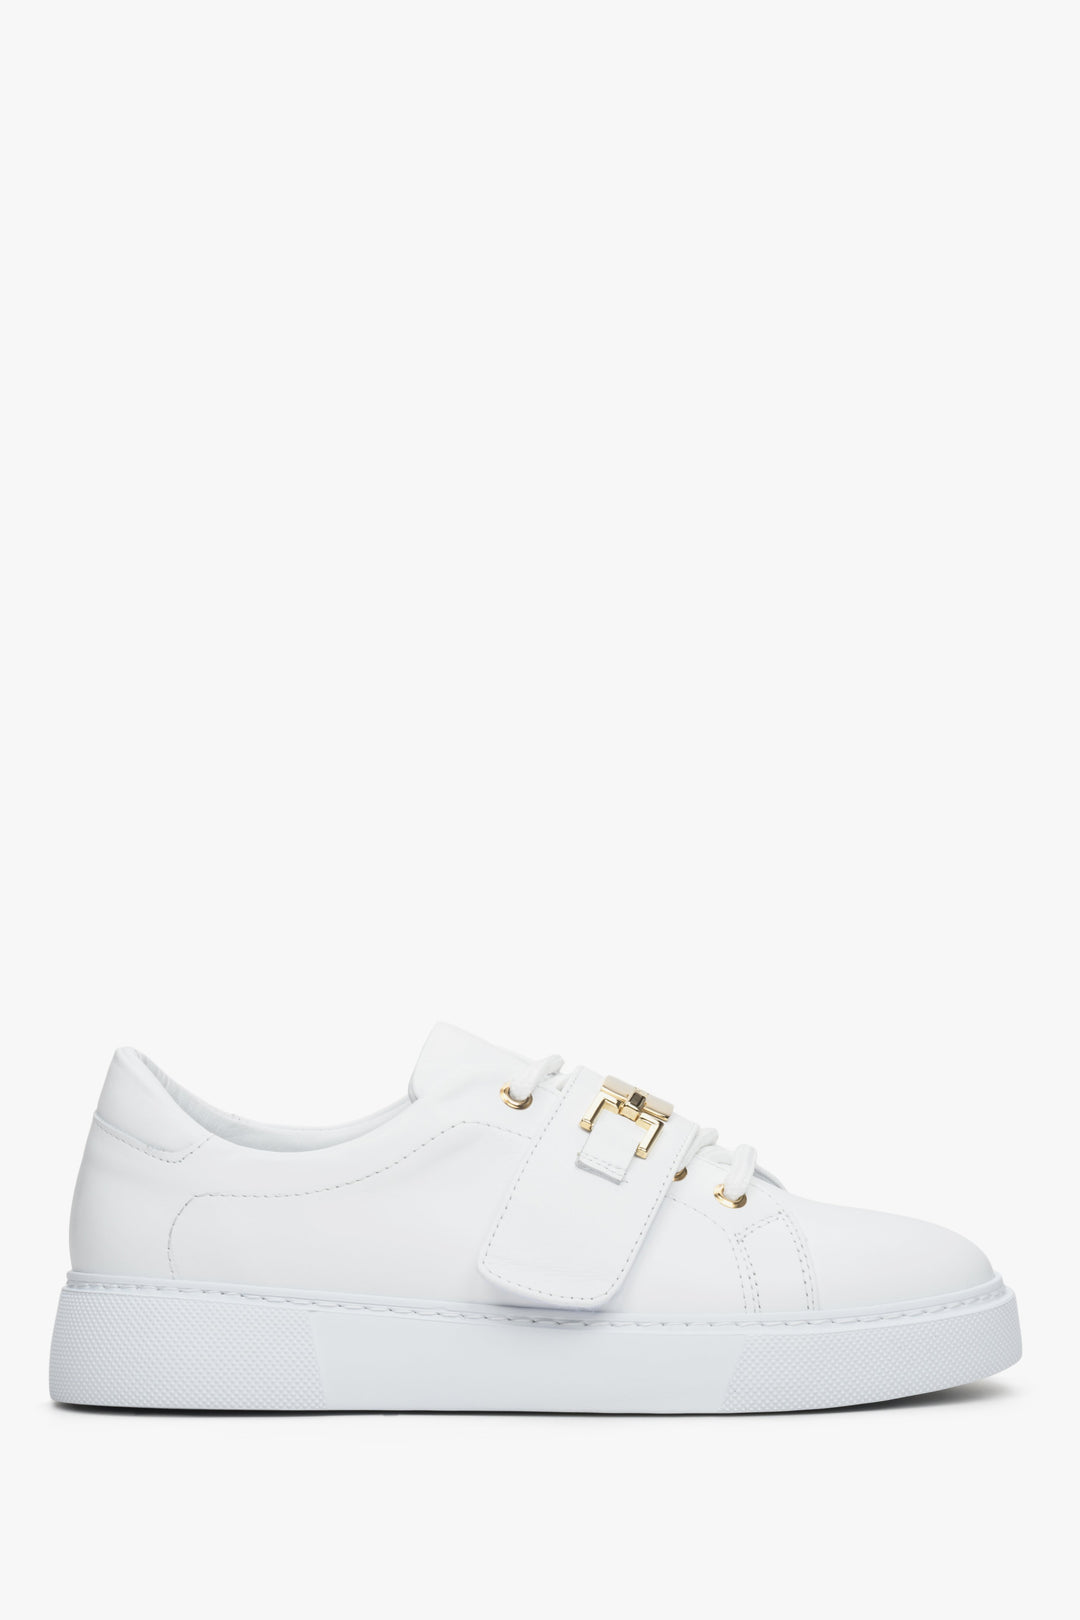 Women's white leather sneakers by Estro with a gold embellishment - shoe profile.